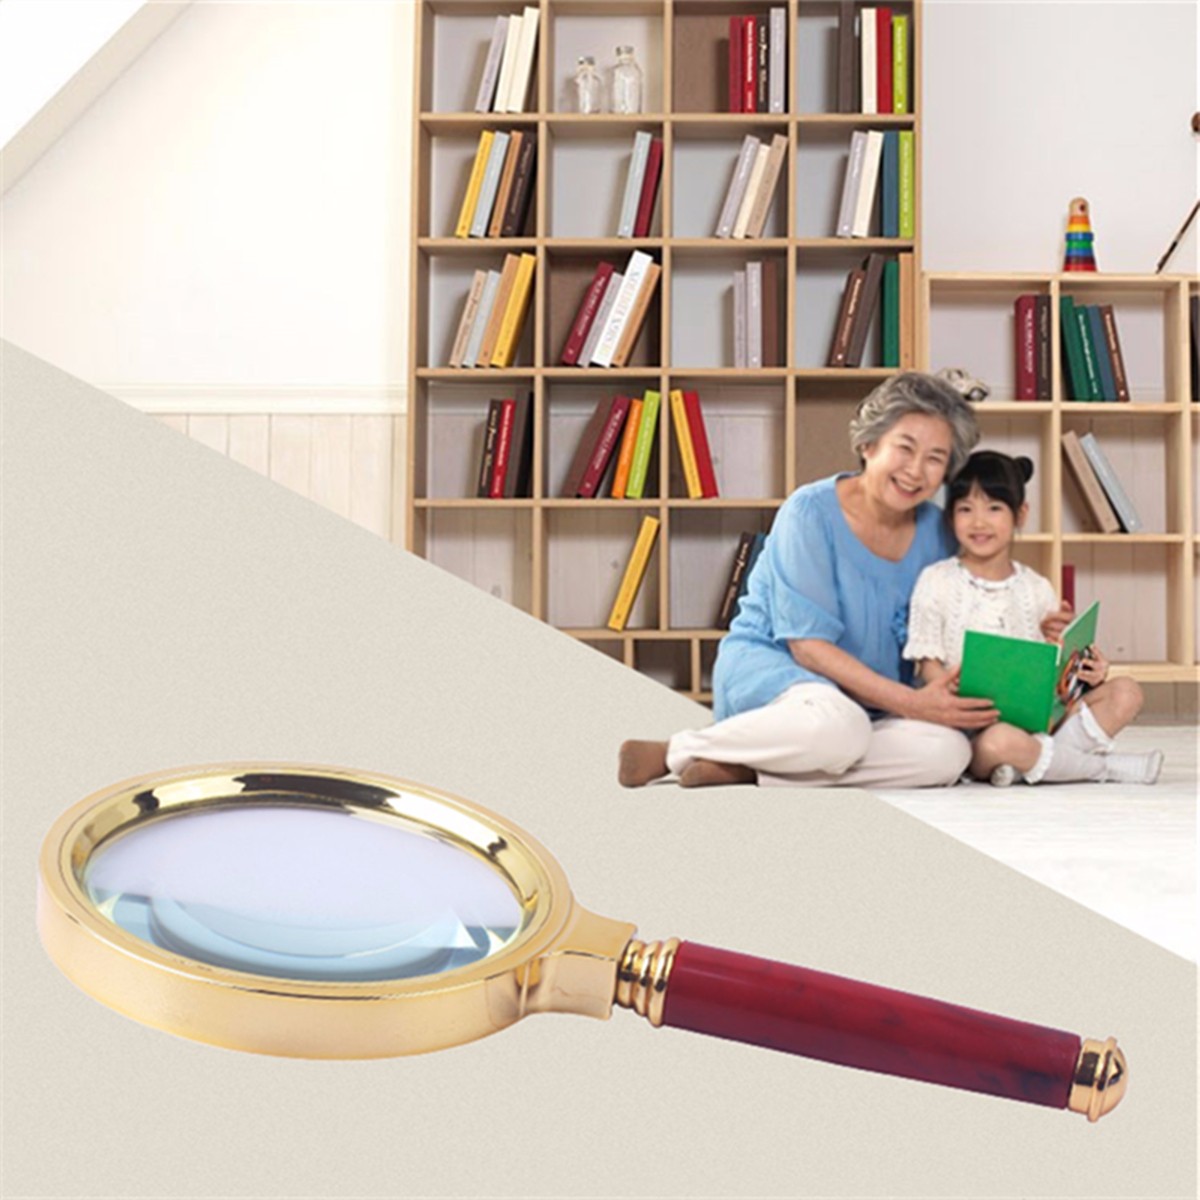 70mm-10X-Handheld-Magnifier-Magnifying-Glass-Loupe-Lens-for-Easy-Reading-Jewelry-1046079-2